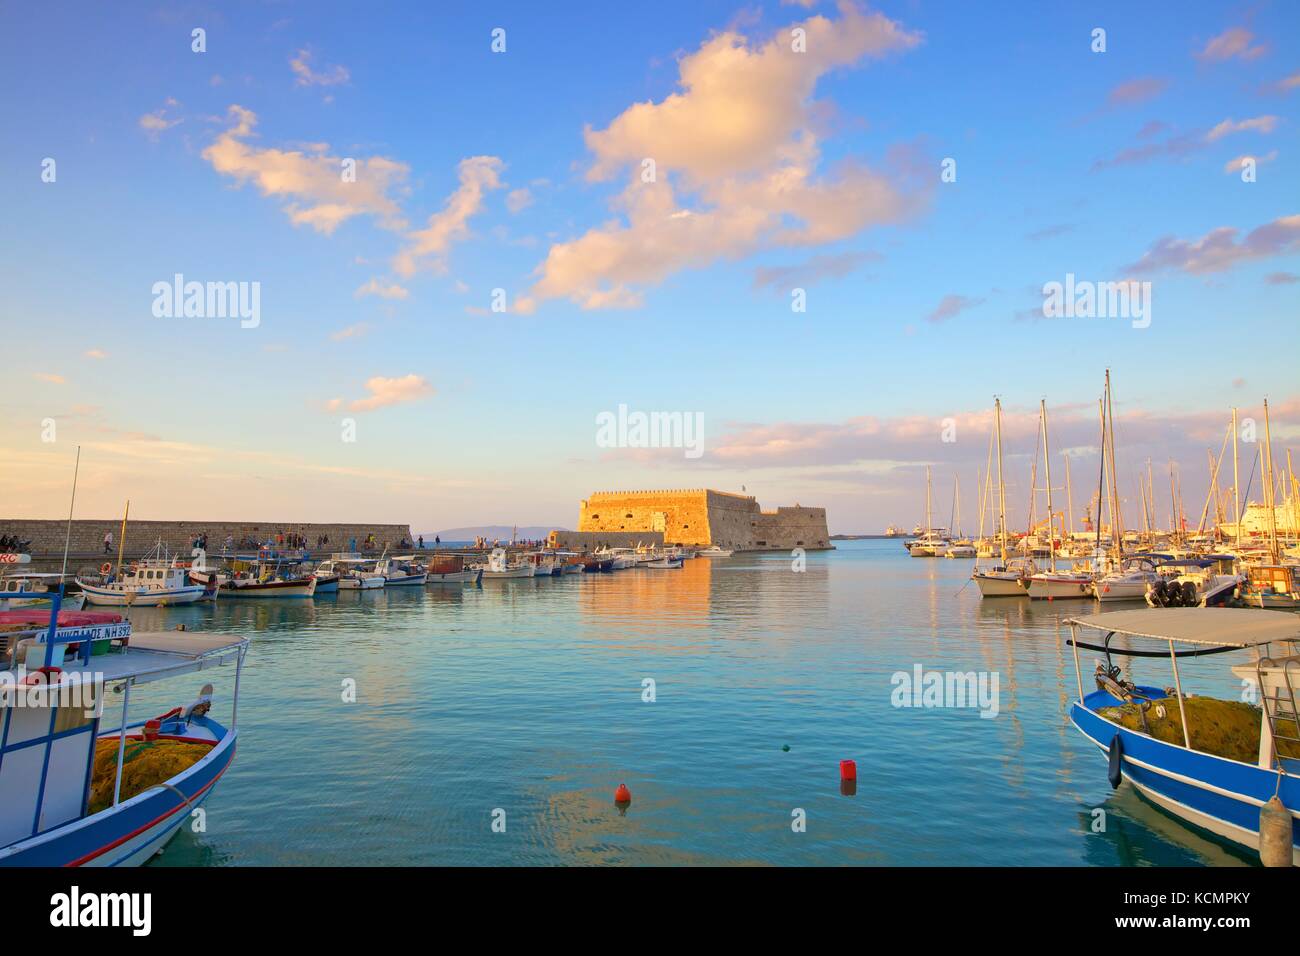 The Boat Lined Venetian Harbour and Fortress, Heraklion, Crete, Greek Islands, Greece, Europe Stock Photo